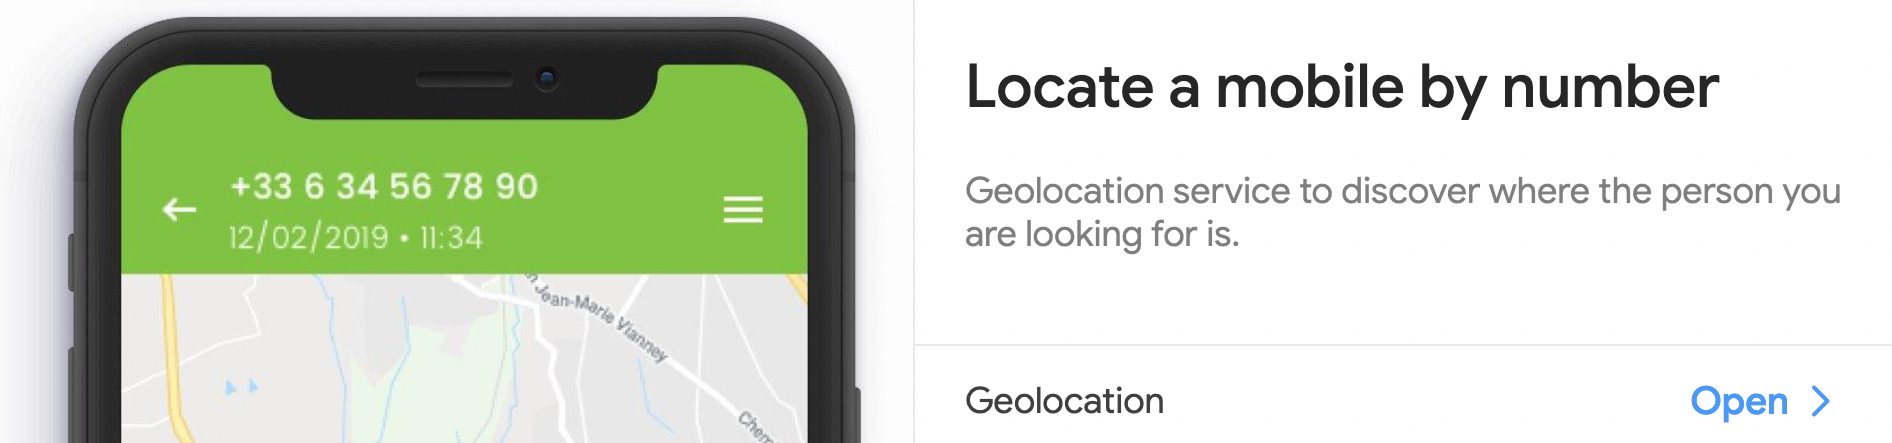 locate mobile by number